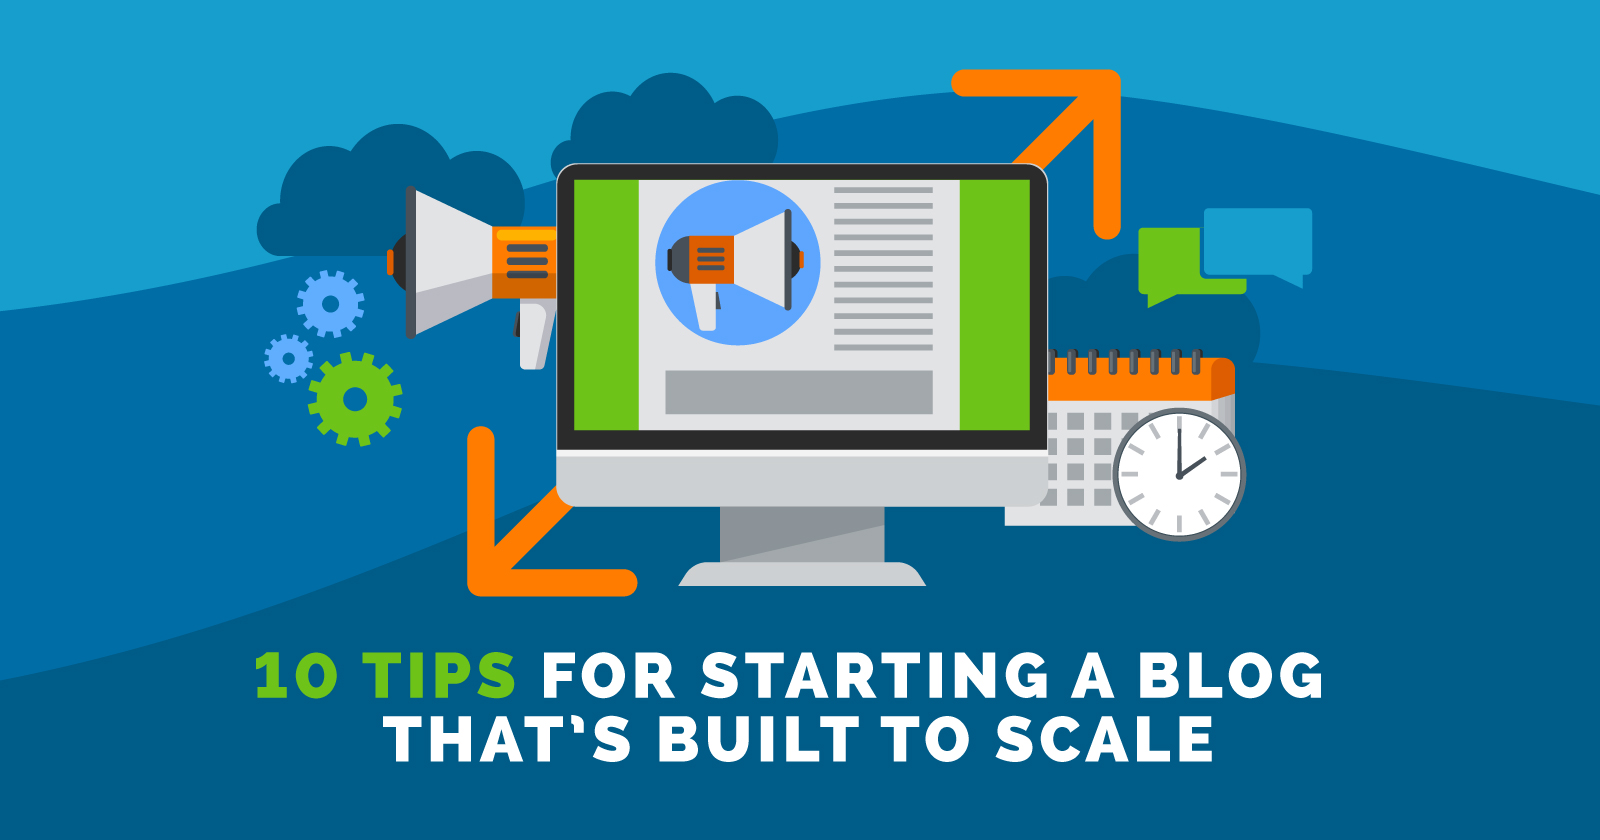 Tips for starting a blog built to scale